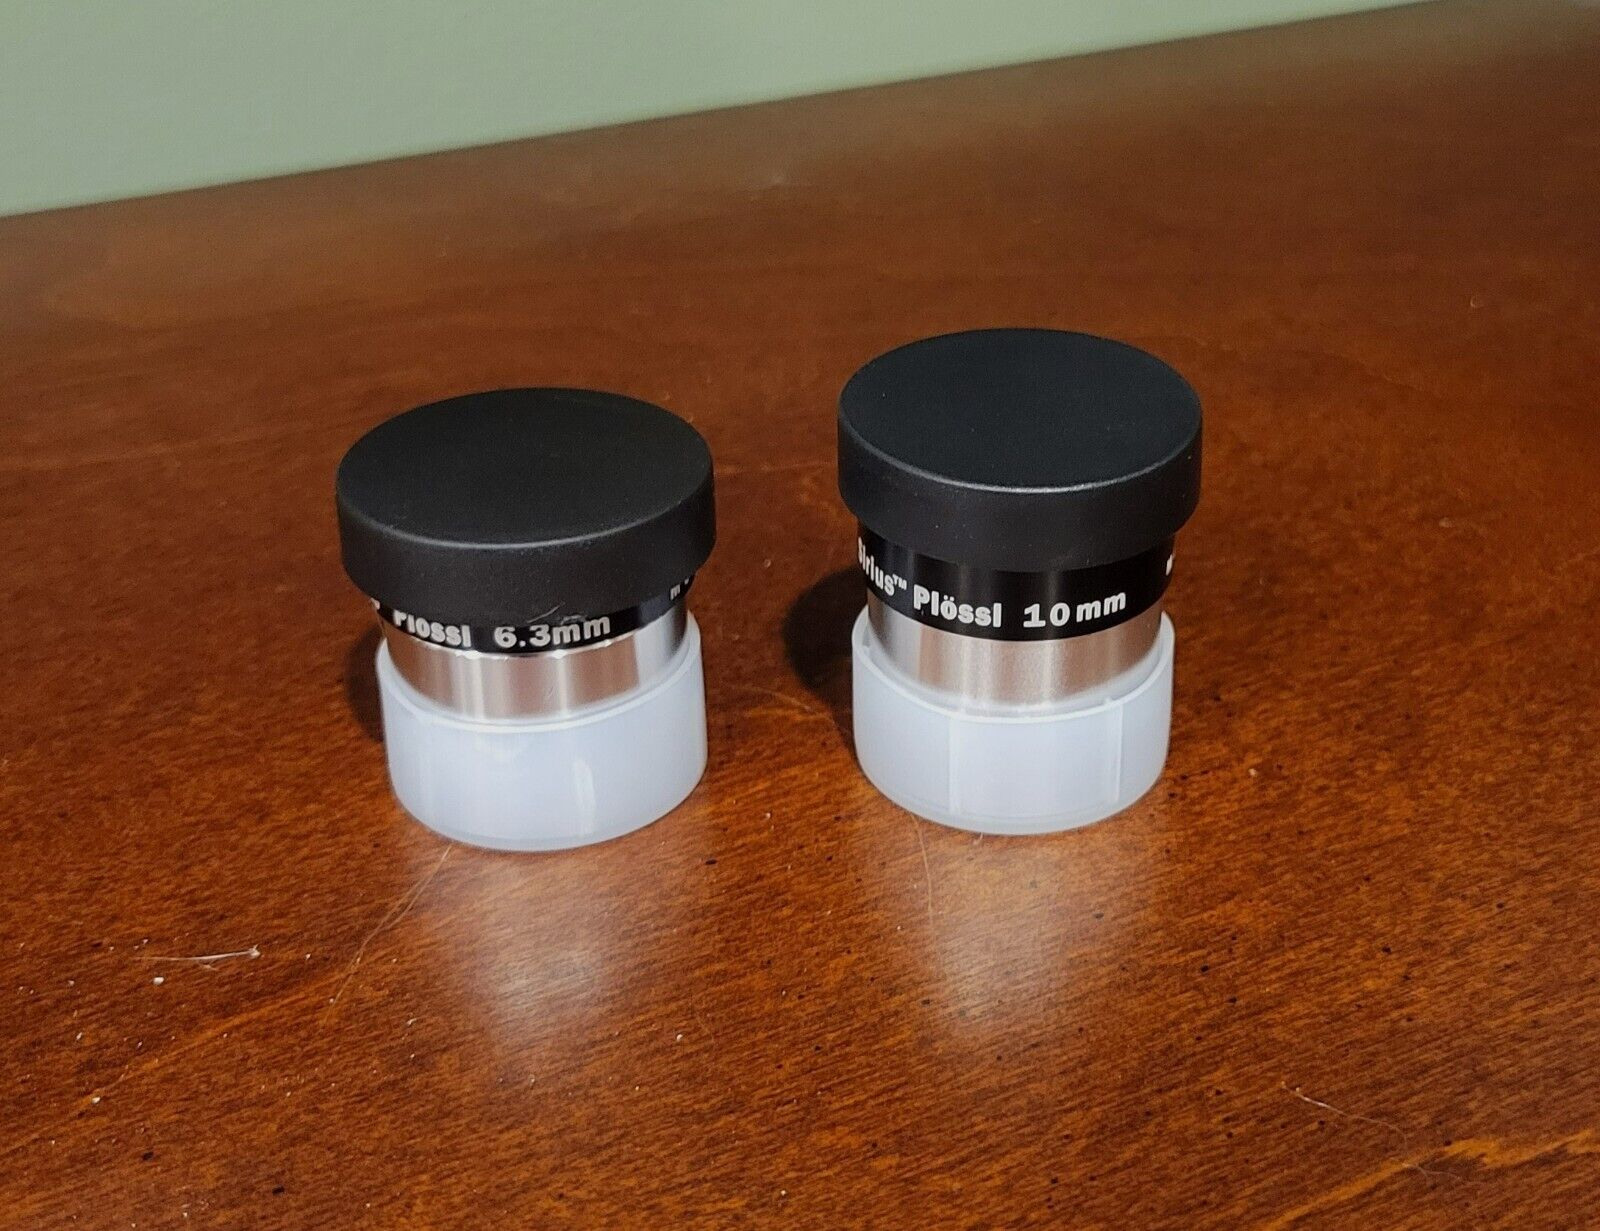 Two Orion Sirius Plossl Telescope Eyepieces (6.3mm and 10mm)